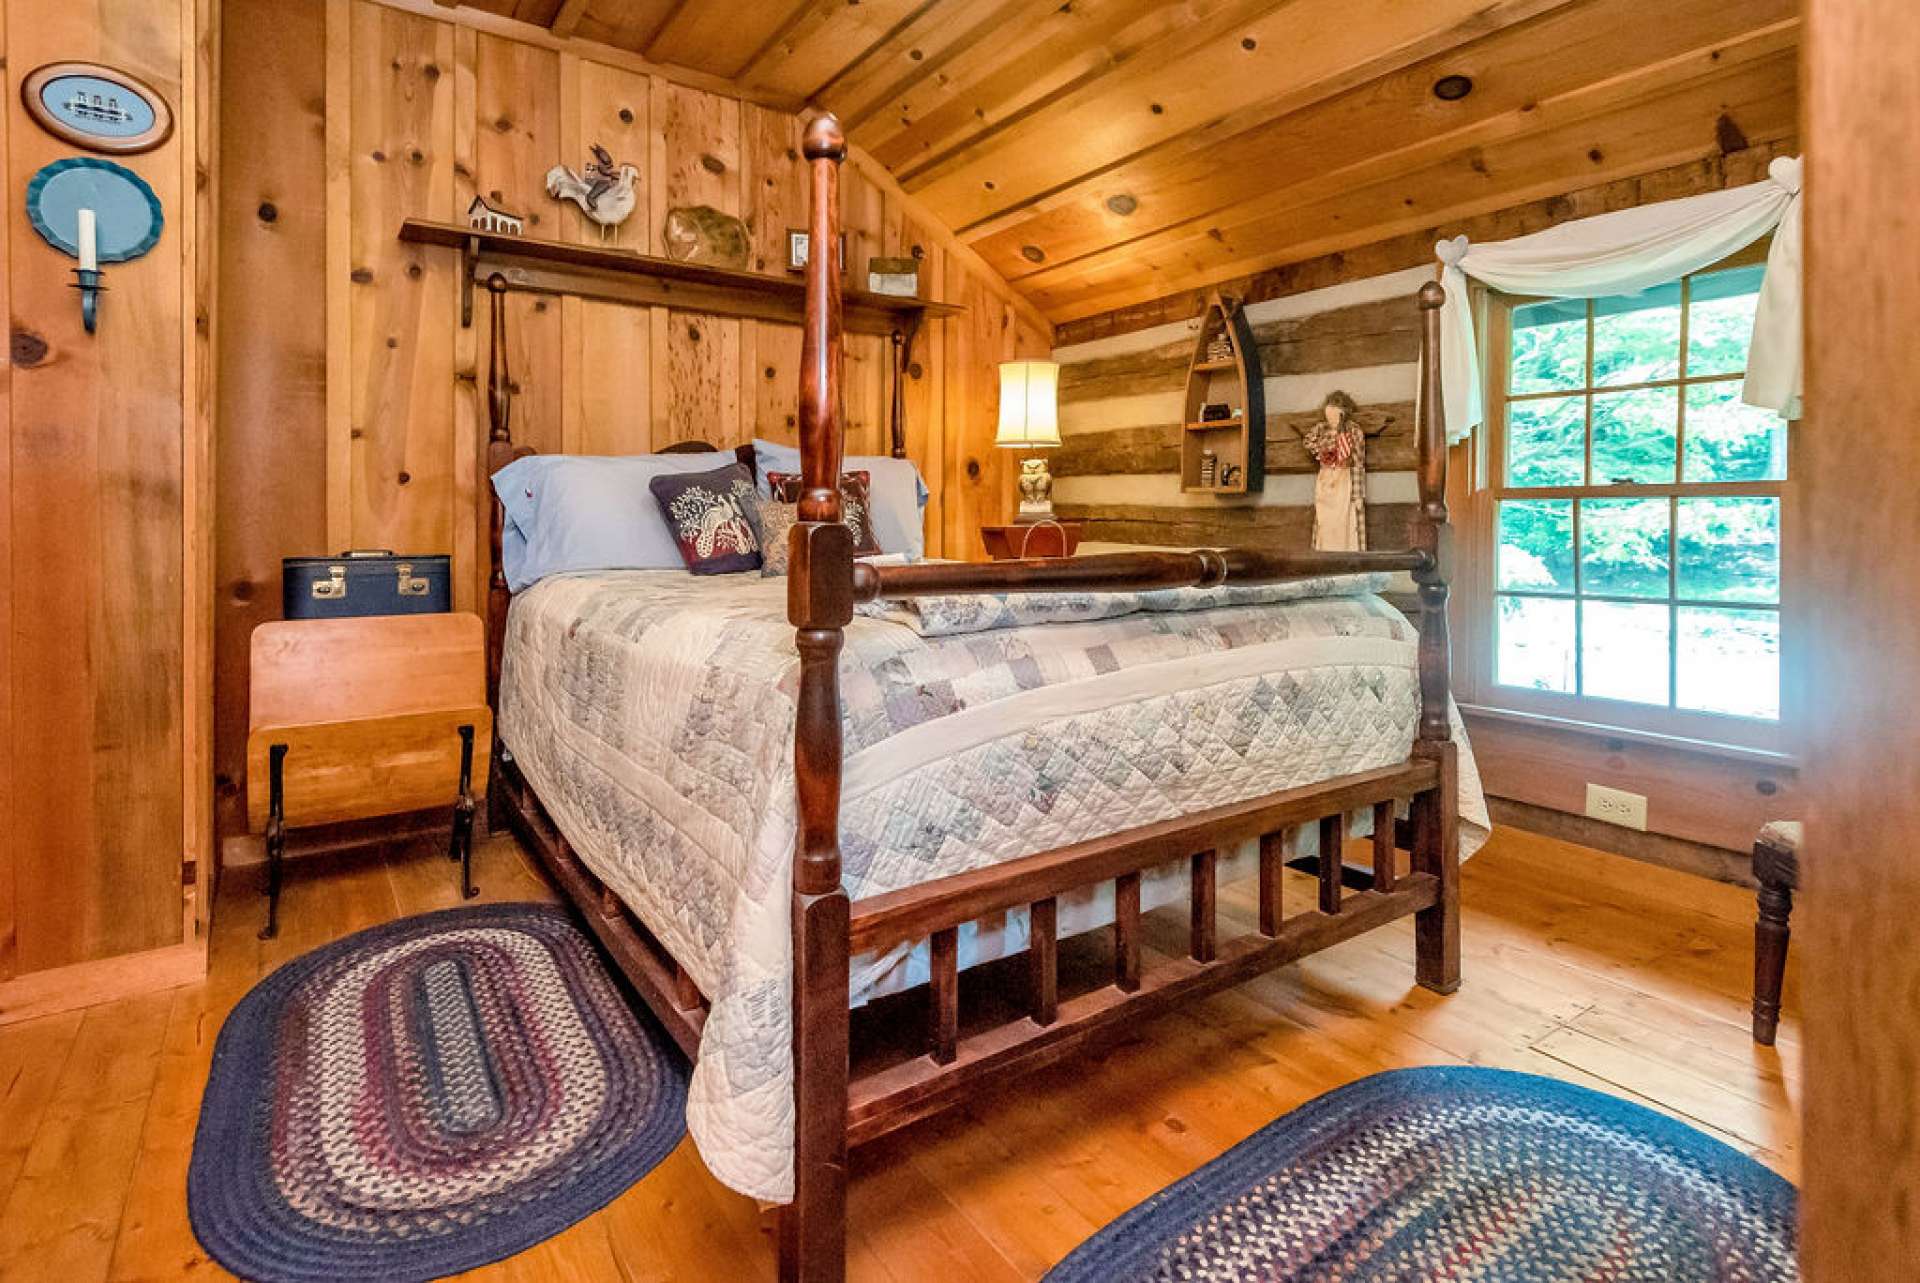 An additional bedroom on the upper level for your family and friends.